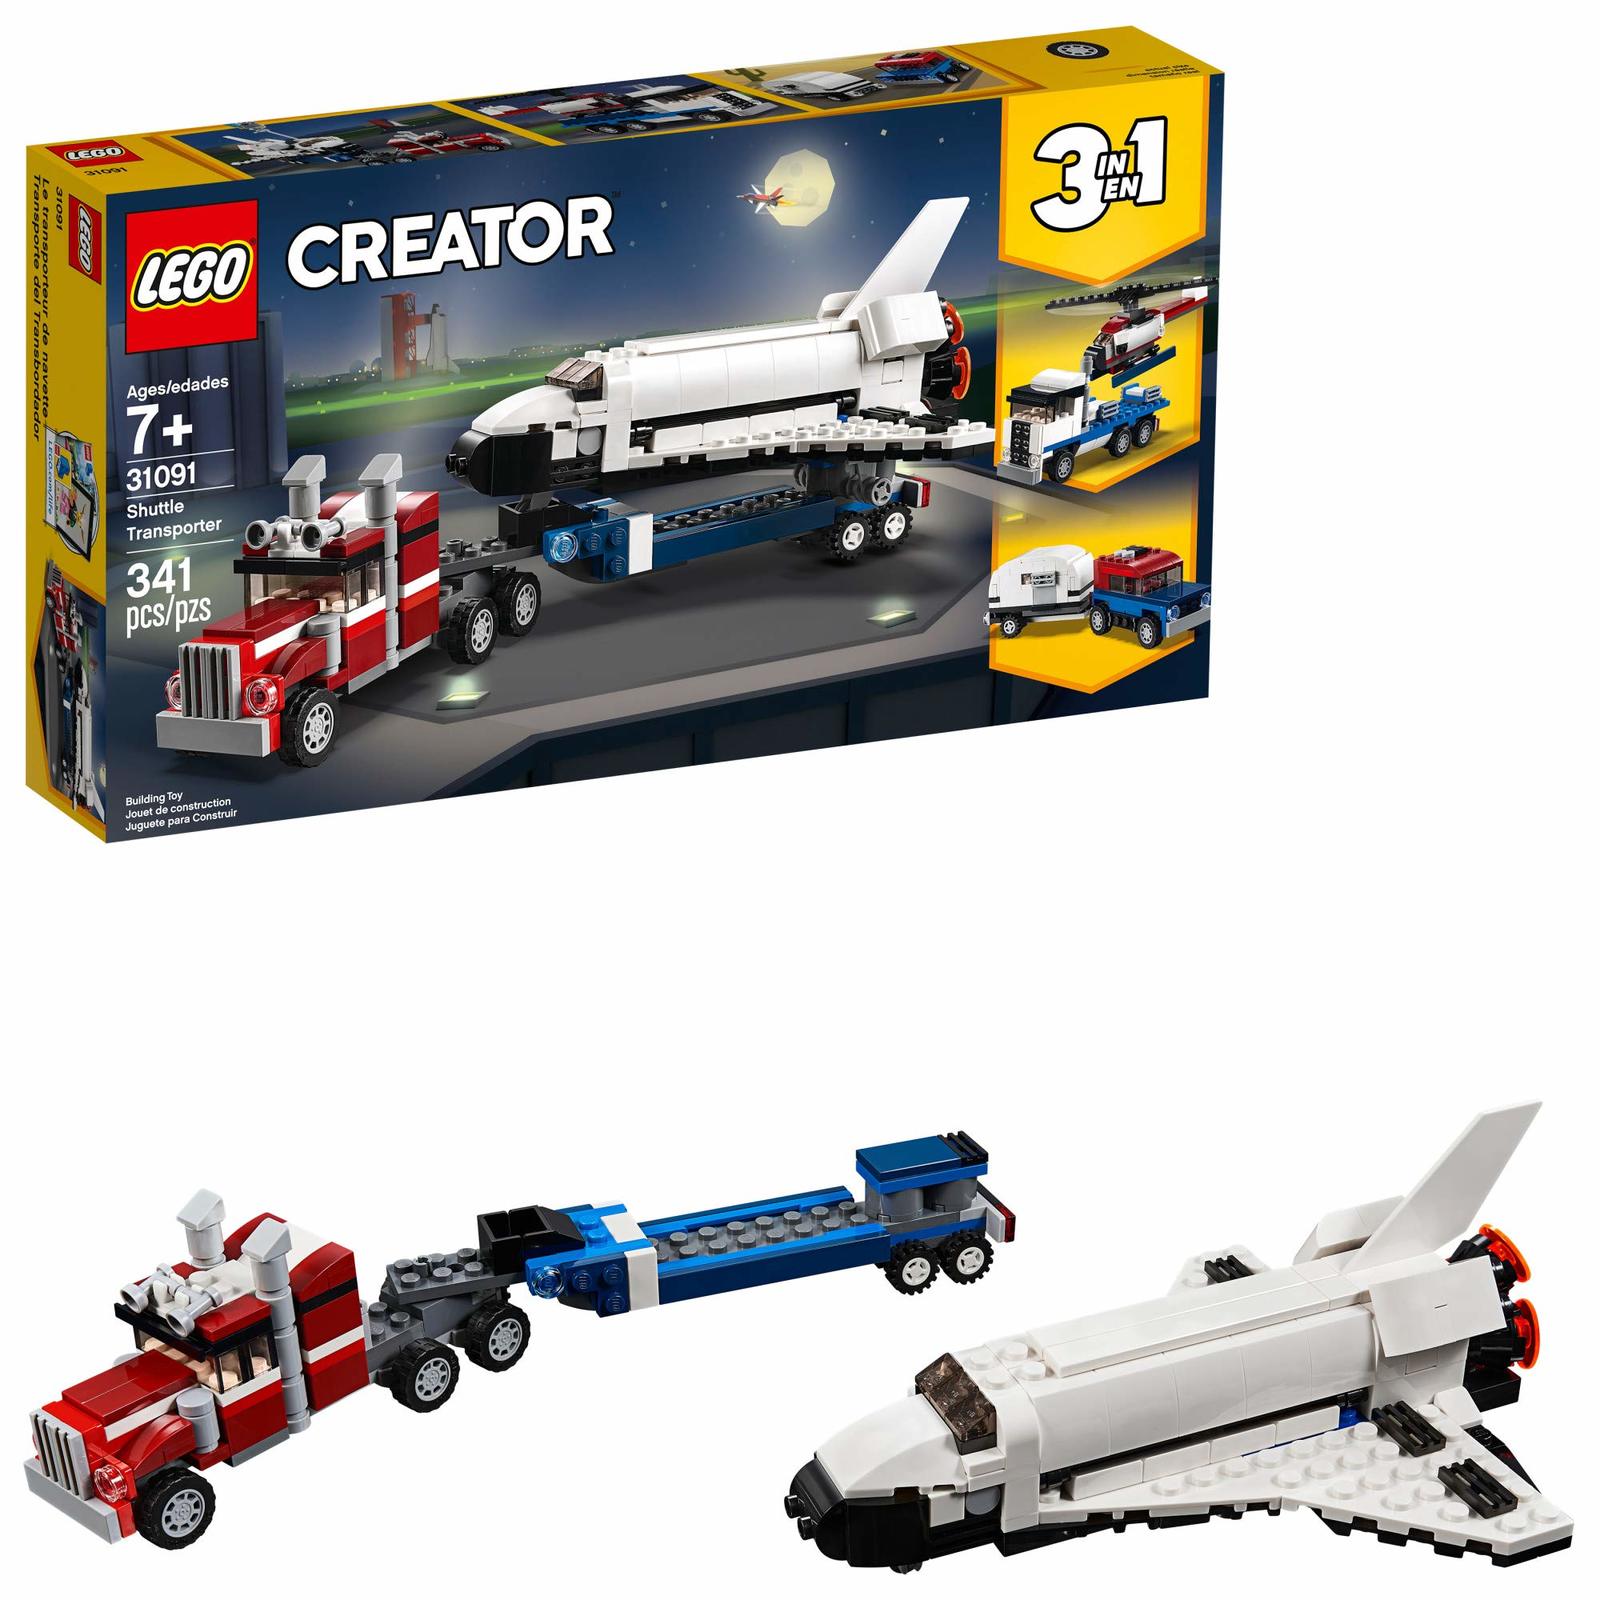 Primary image for LEGO Creator 3in1 Shuttle Transporter 31091 Building Kit (341 Pieces)